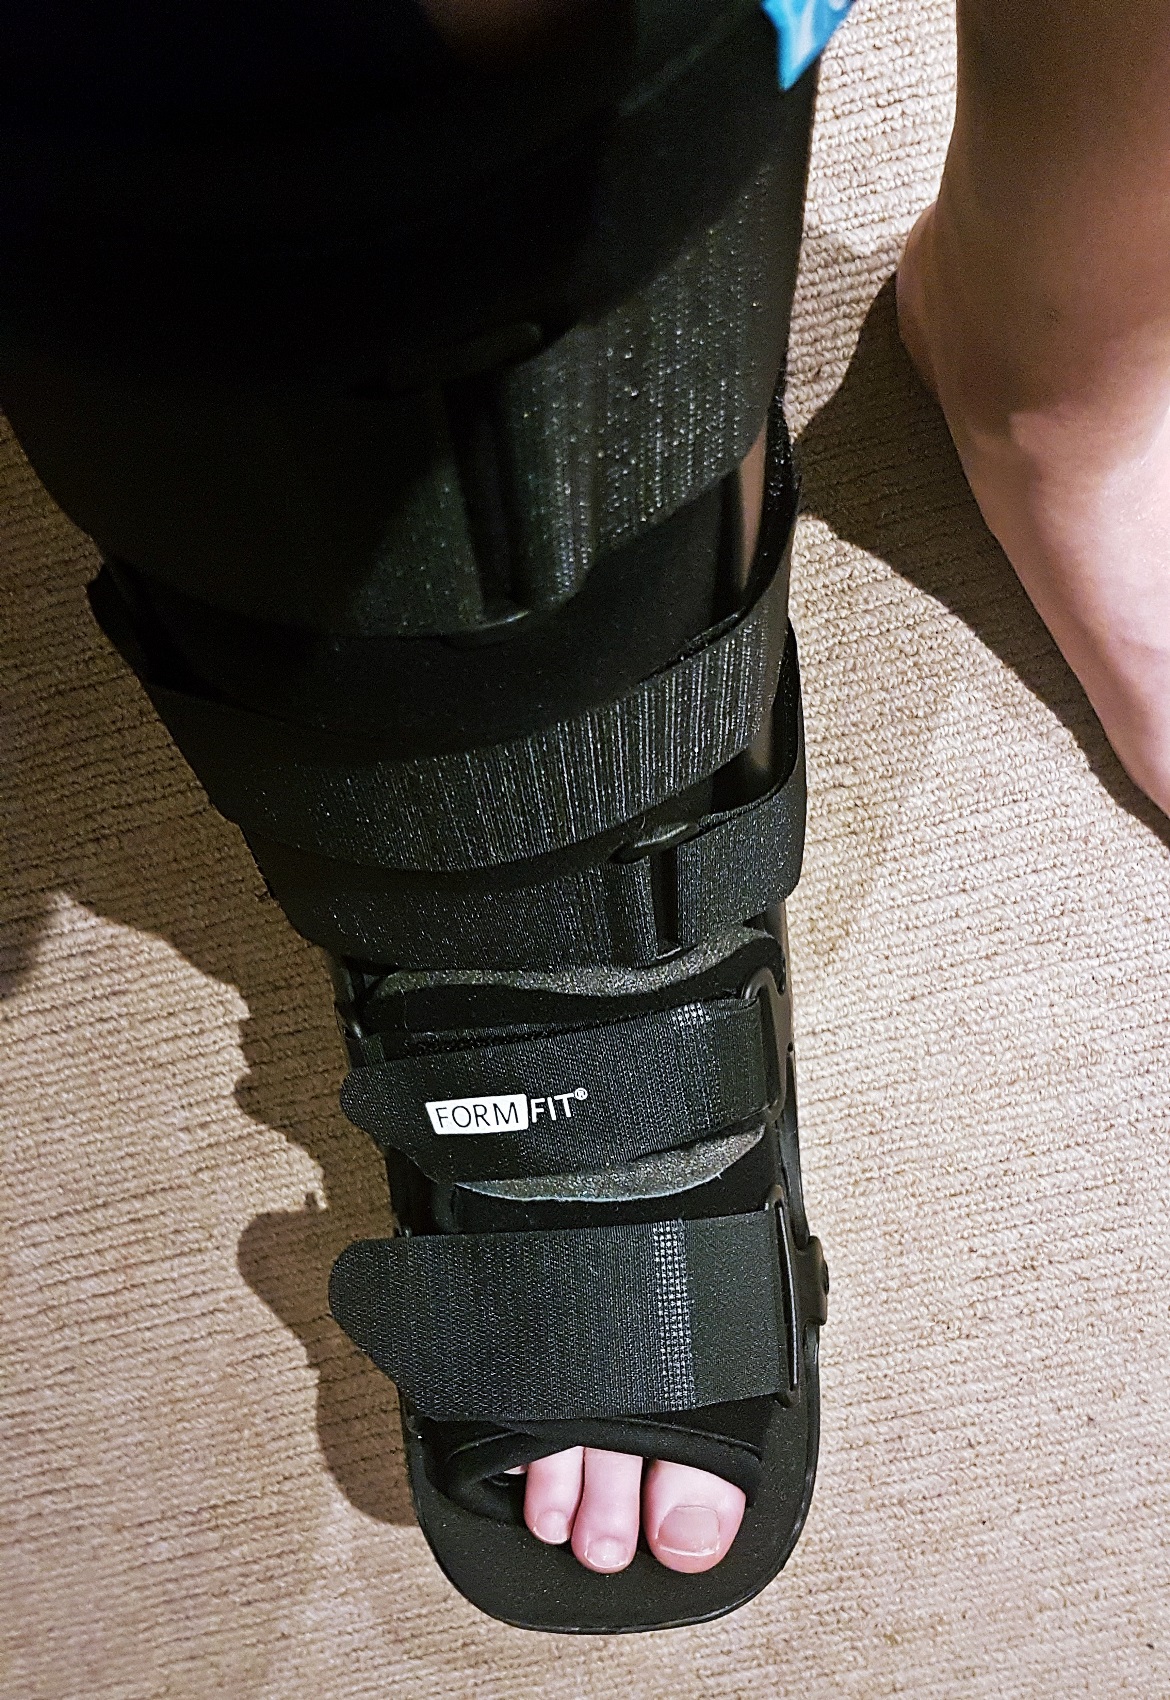 My walking boot - One Broken Foot, Two Chronic Illnesses, and the Importance of Positivity by BeckyBecky Blogs